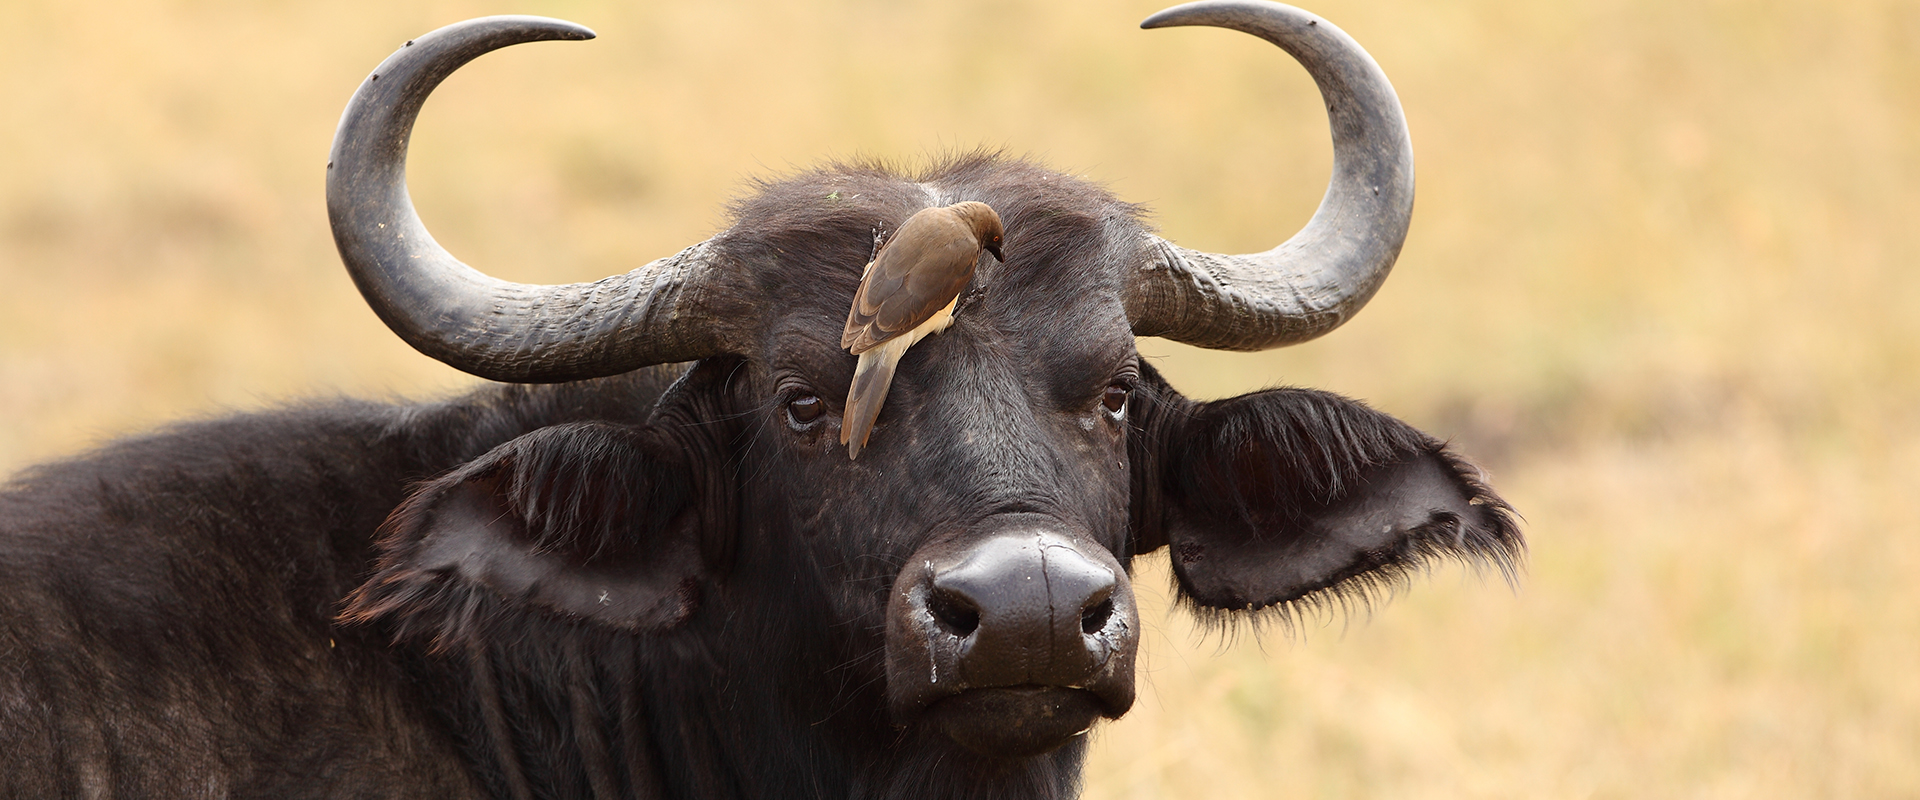 Cute little bird sitting on a black buffalo’s face in the middle of a field in a jungle